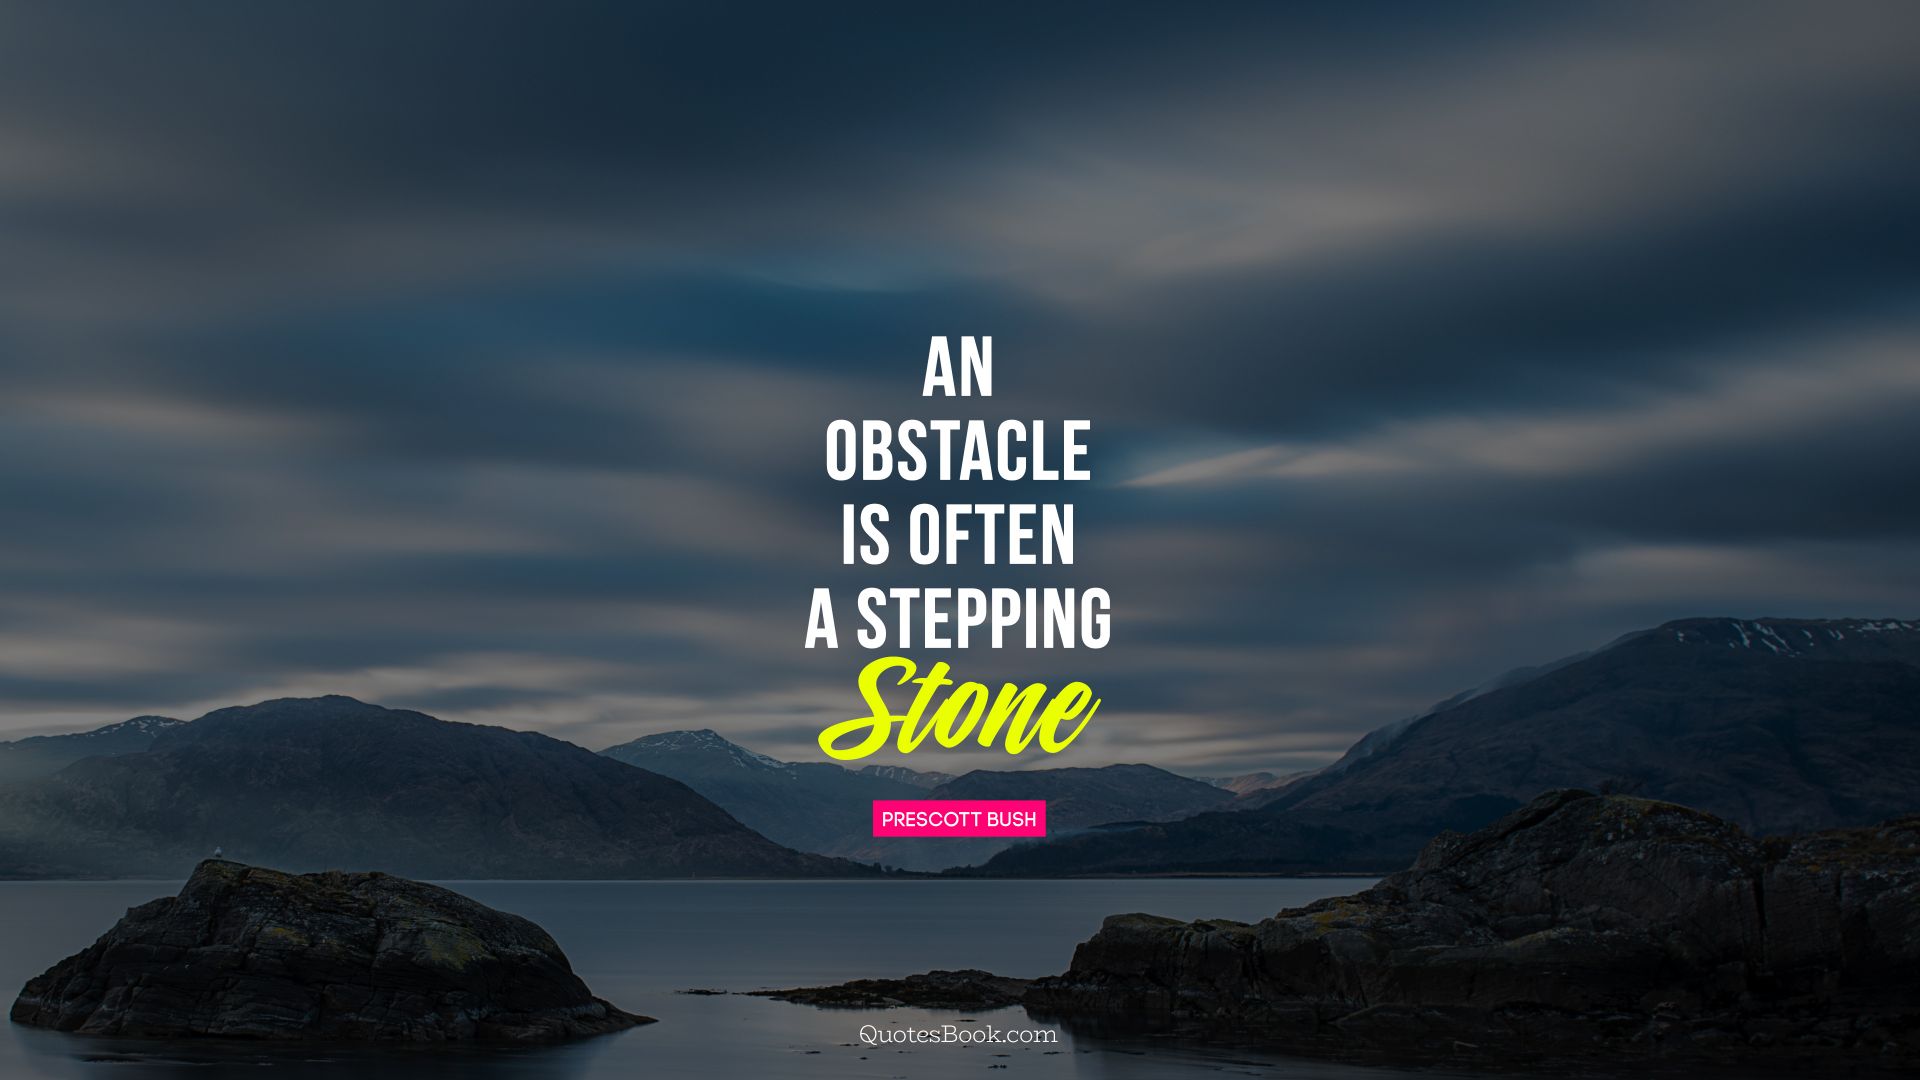 An obstacle is often a stepping stone. - Quote by Prescott Bush